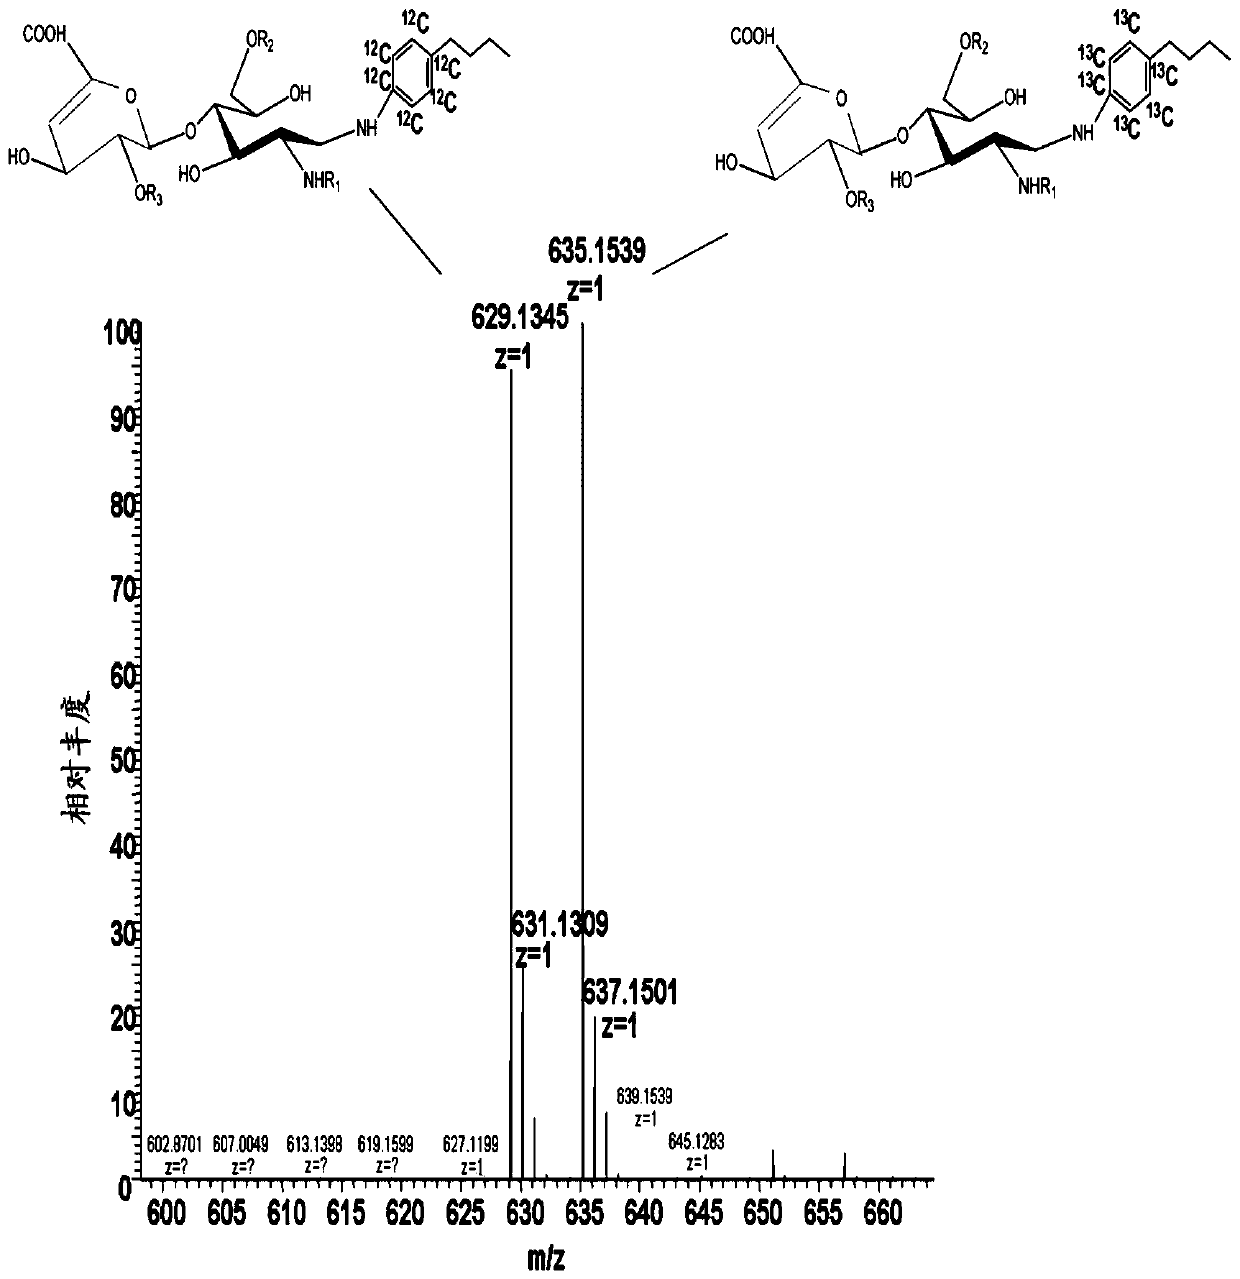 Determination of Glycosaminoglycan Levels by Mass Spectrometry